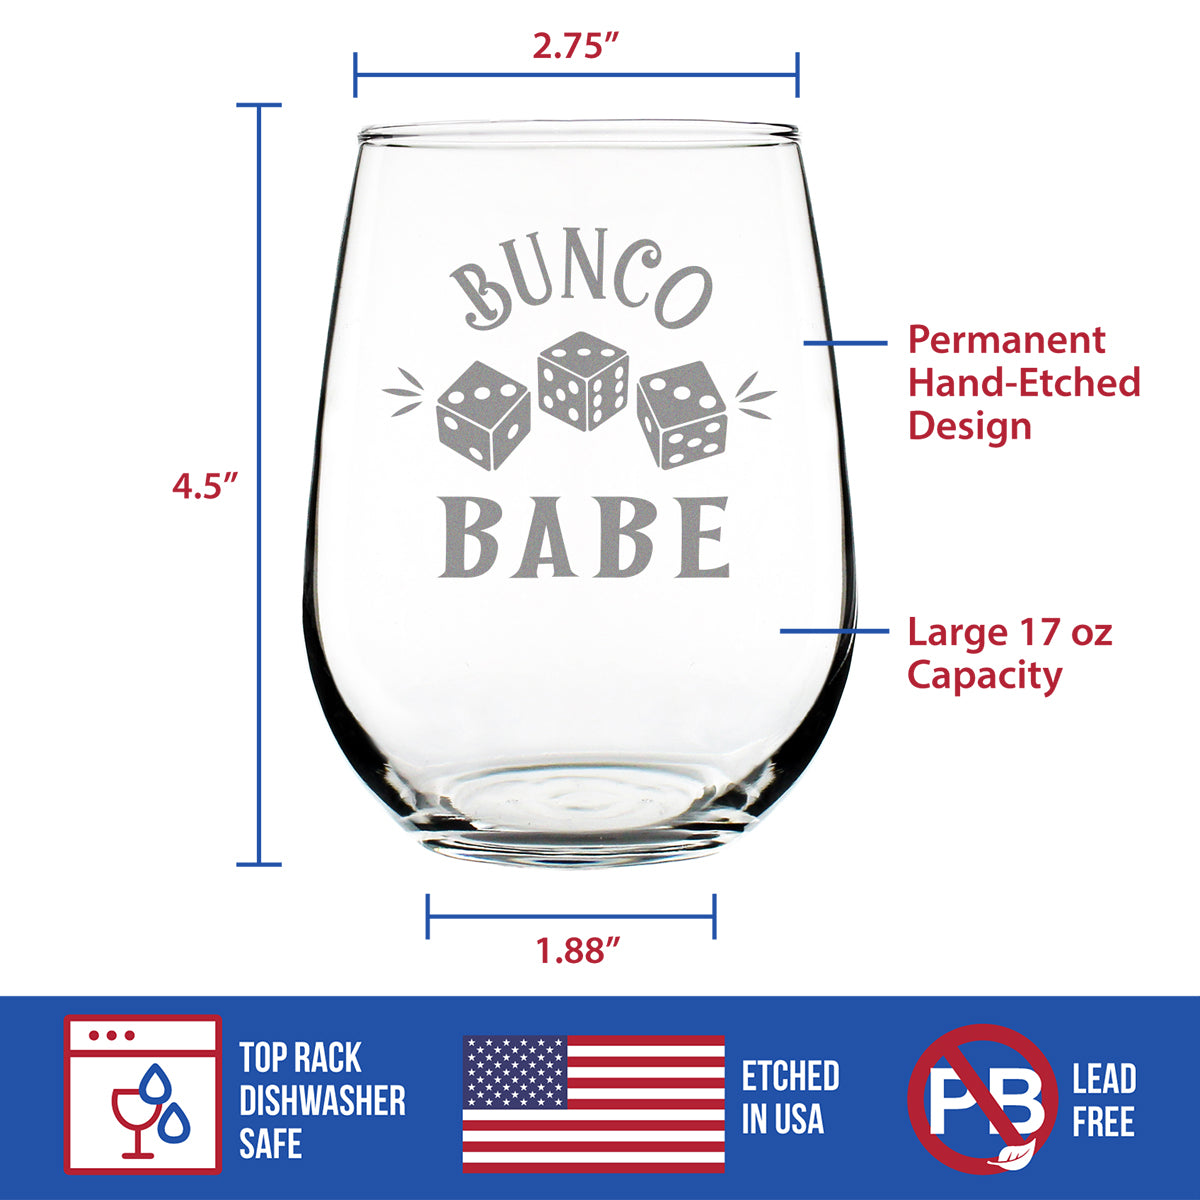 Bunco Babe Stemless Wine Glass - Bunco Decor and Bunco Gifts for Women - Large 17 Oz Glasses